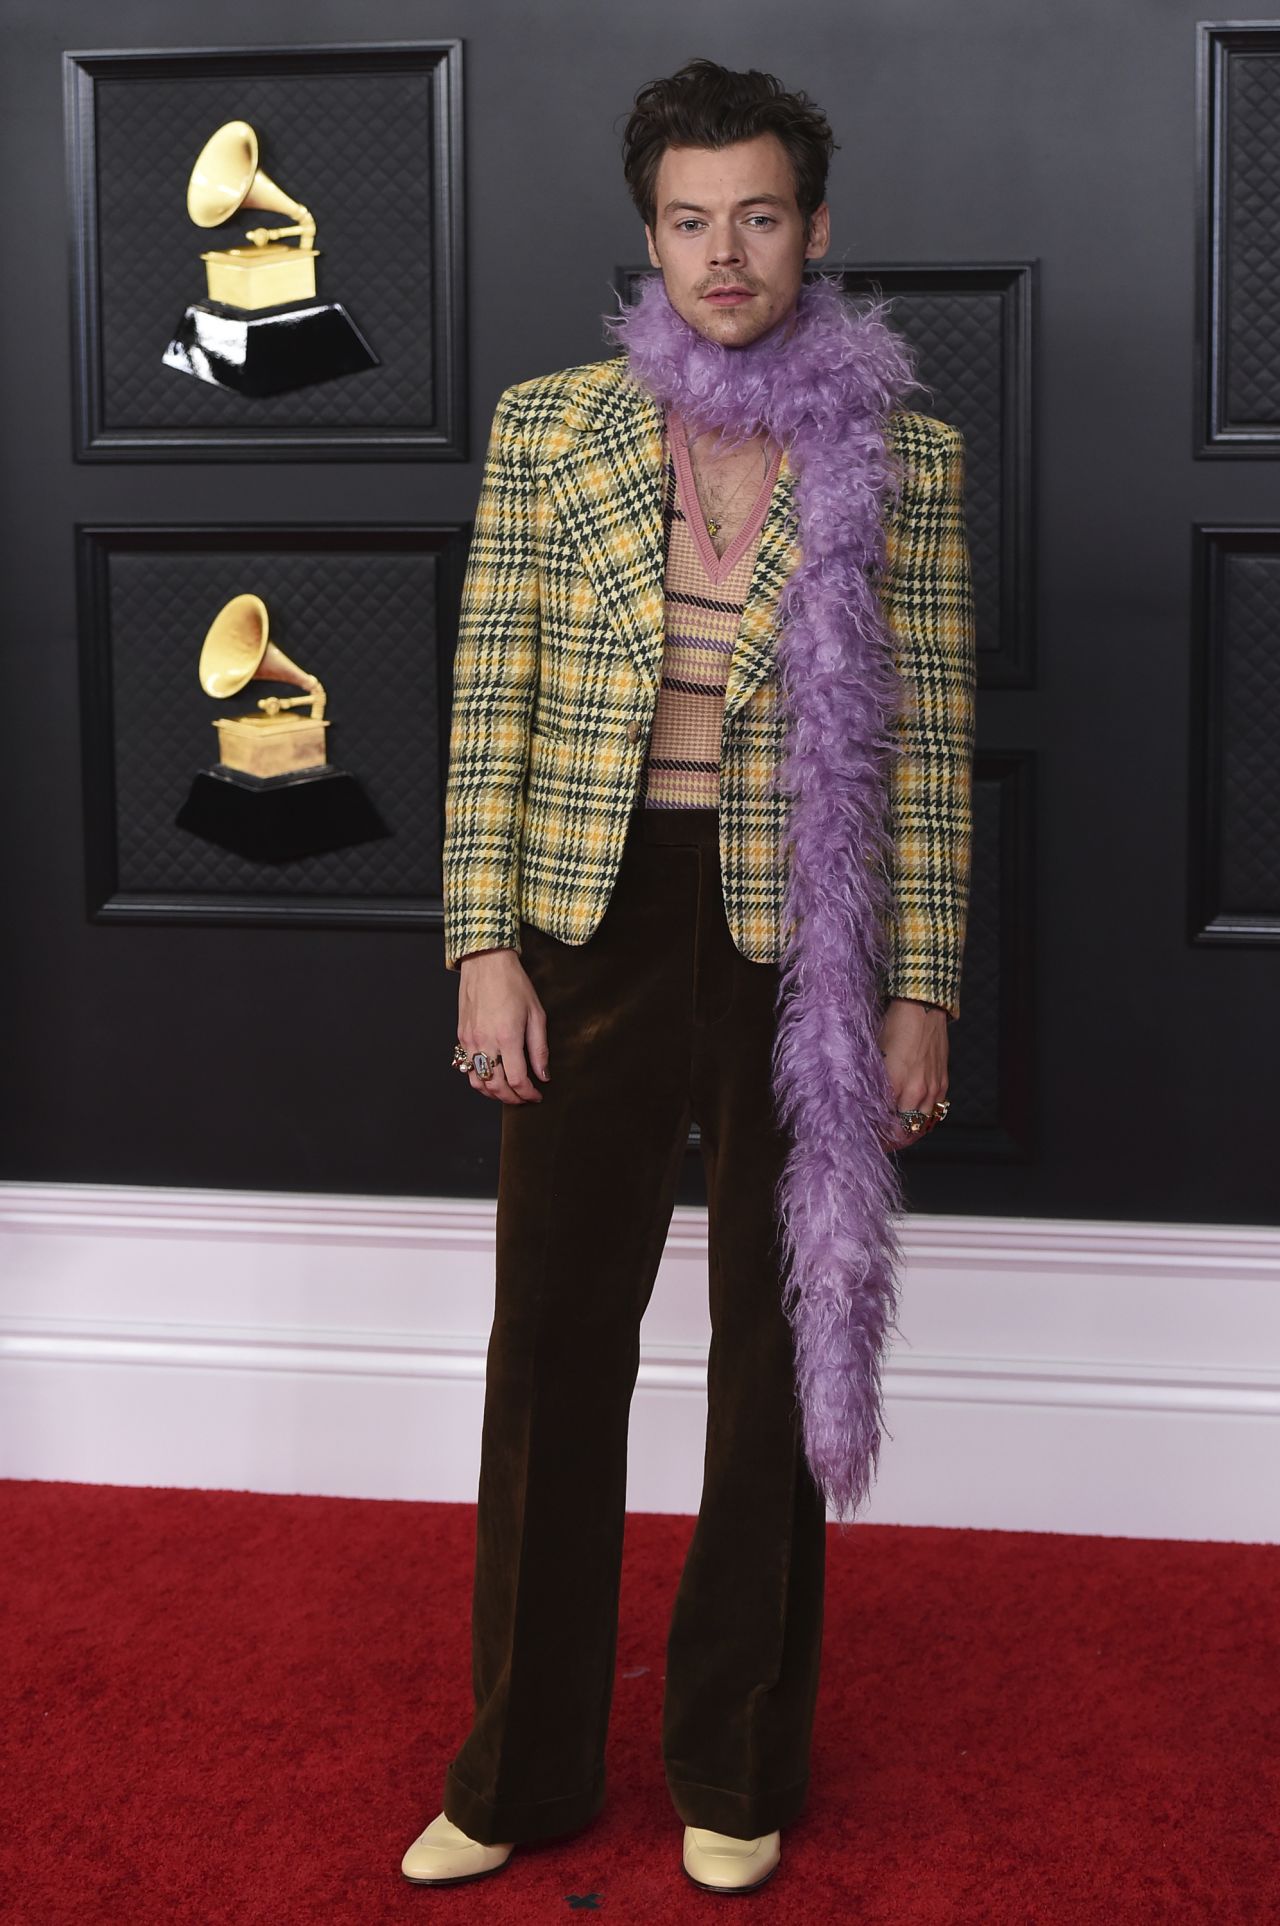 Harry Styles effortlessly paired his yellow plaid suit on the red carpet with a purple feather boa. On stage, he swapped purple for chartreuse. 